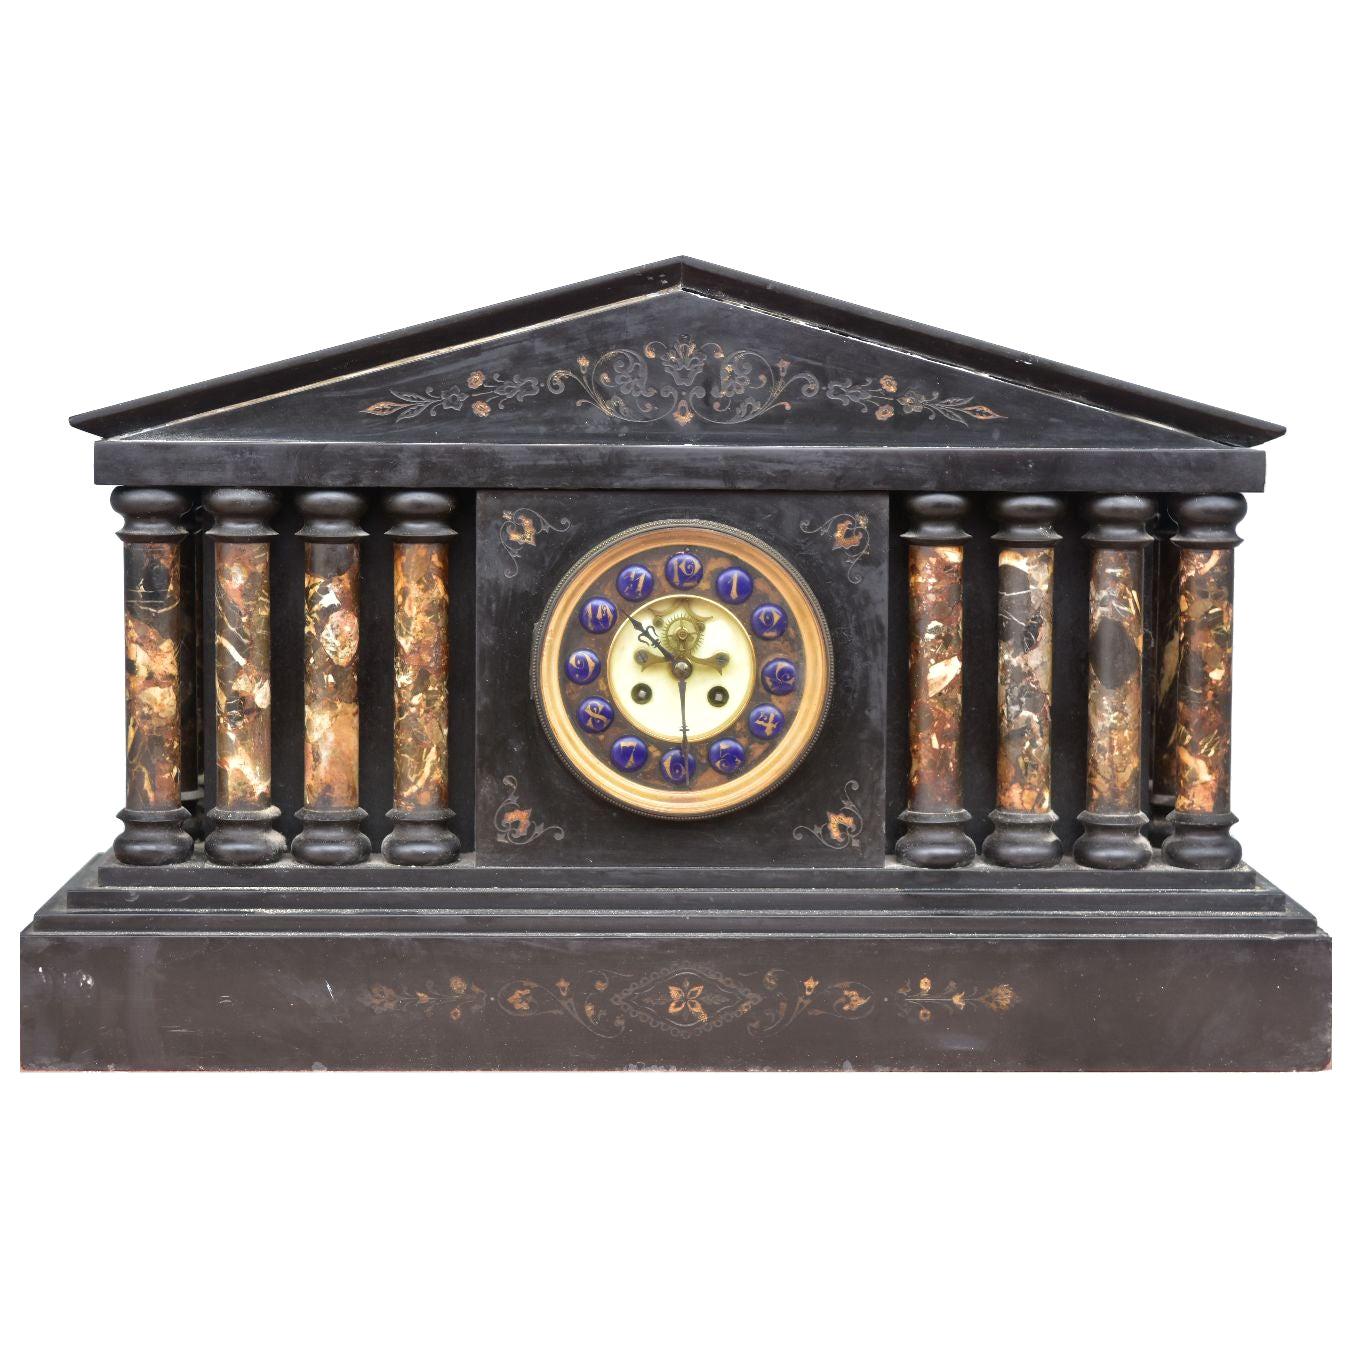 19th Century Architectural Clock in Black Onyx Marble